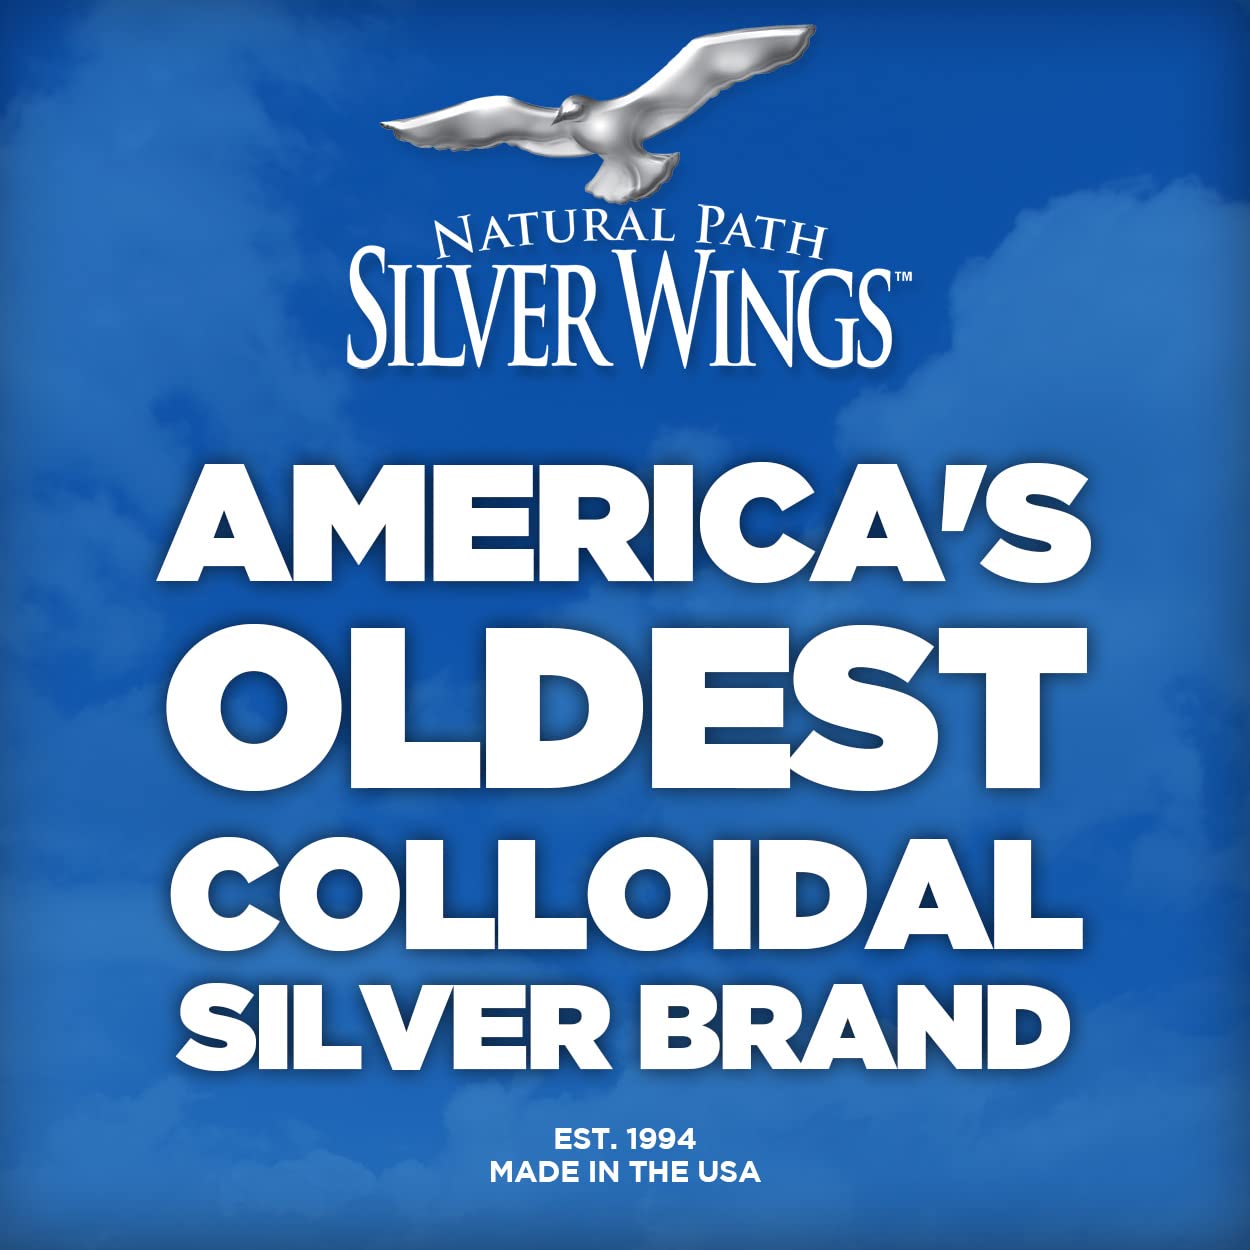 Natural Path Silver Wings Colloidal Silver 250ppm 16oz - Premium Glass Bottle - Amber Color Means Higher Concentration Than Clear Silver Liquids - Natural Mineral Supplement (1250mcg)